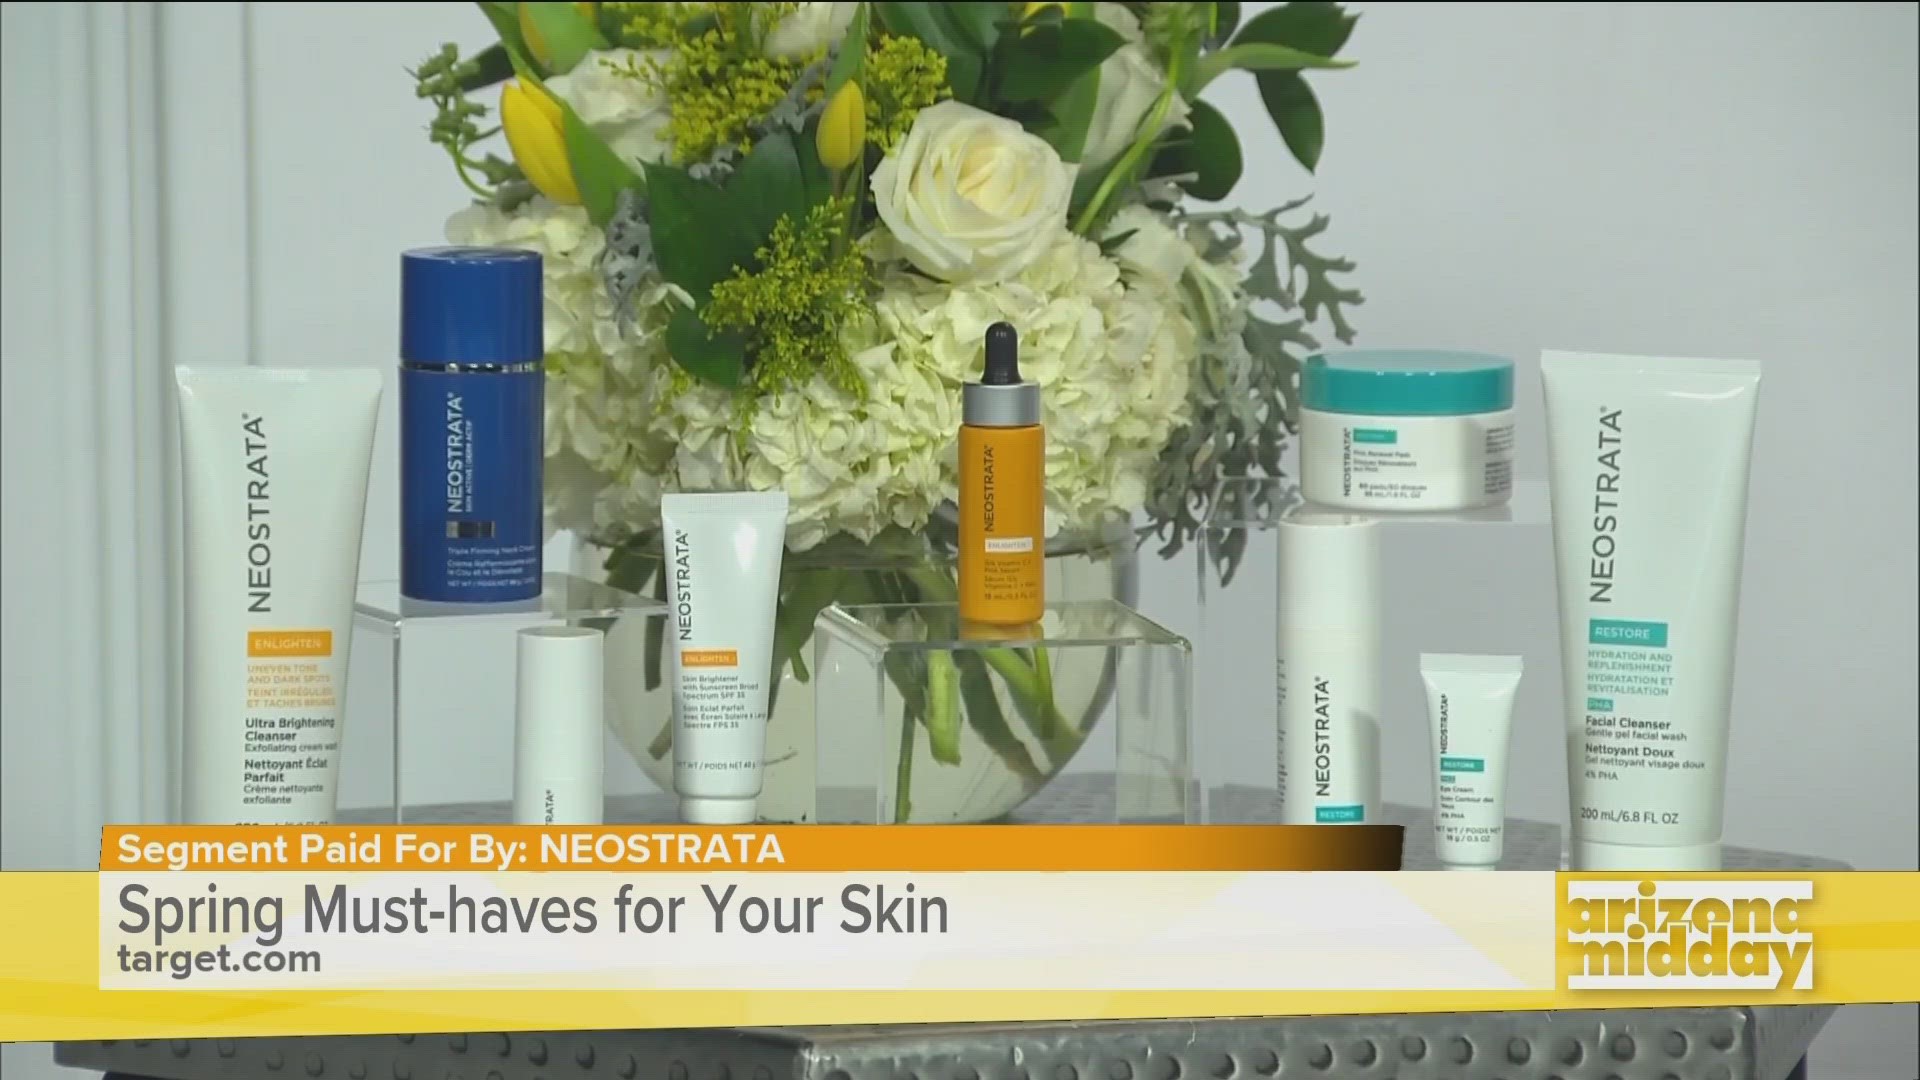 Dermatologist Dr. Tia Paul shares how award-winning skincare brand Neostrata is now officially available at Target and Target.com.